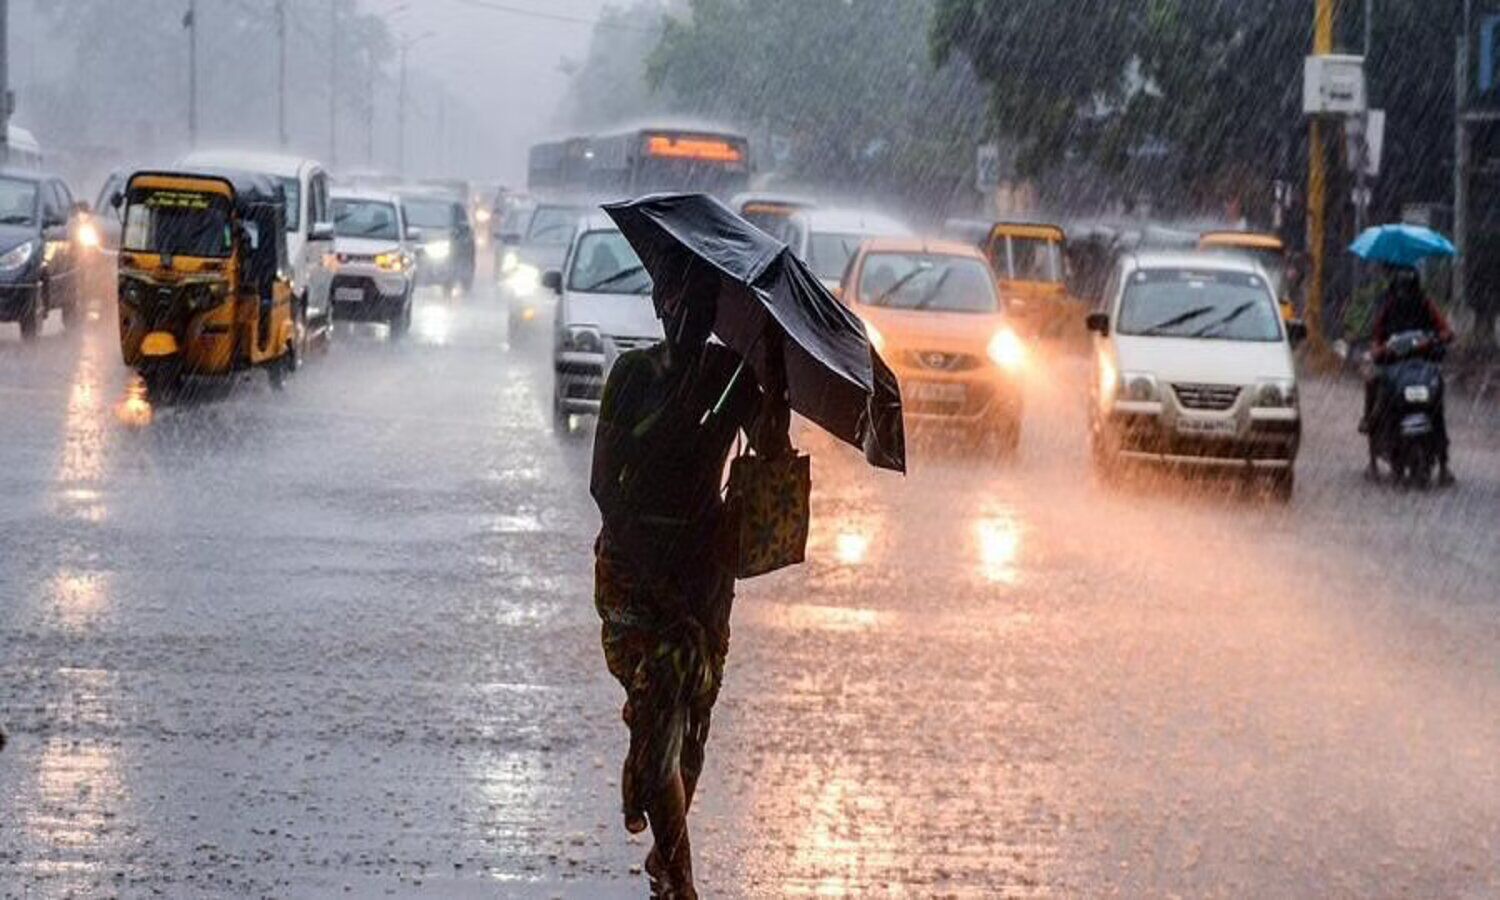 Weather Today: Durga Puja and Dussehra festival will be hit by rain, there will be rain in many states even today